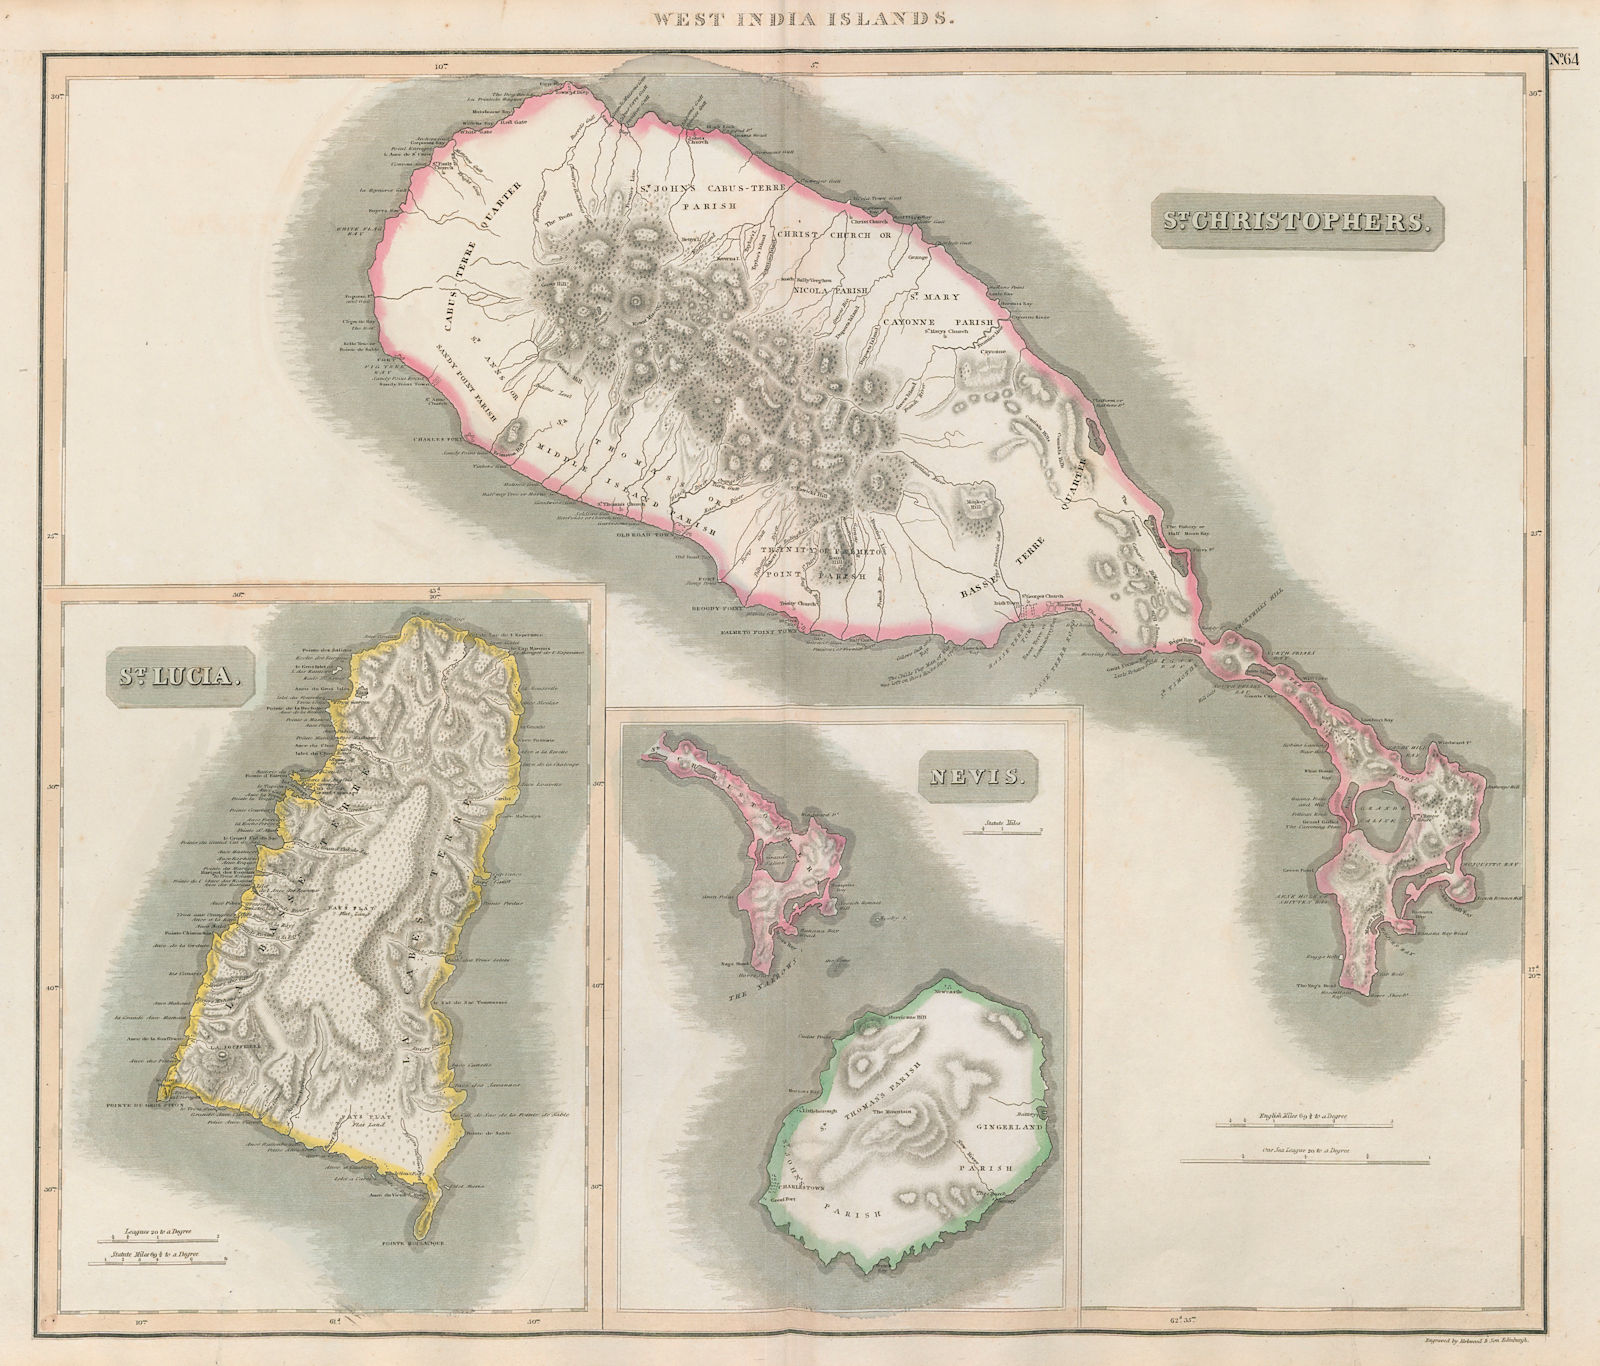 St Lucia, St Christophers & Nevis. St Kitts. West Indies. THOMSON 1817 old map